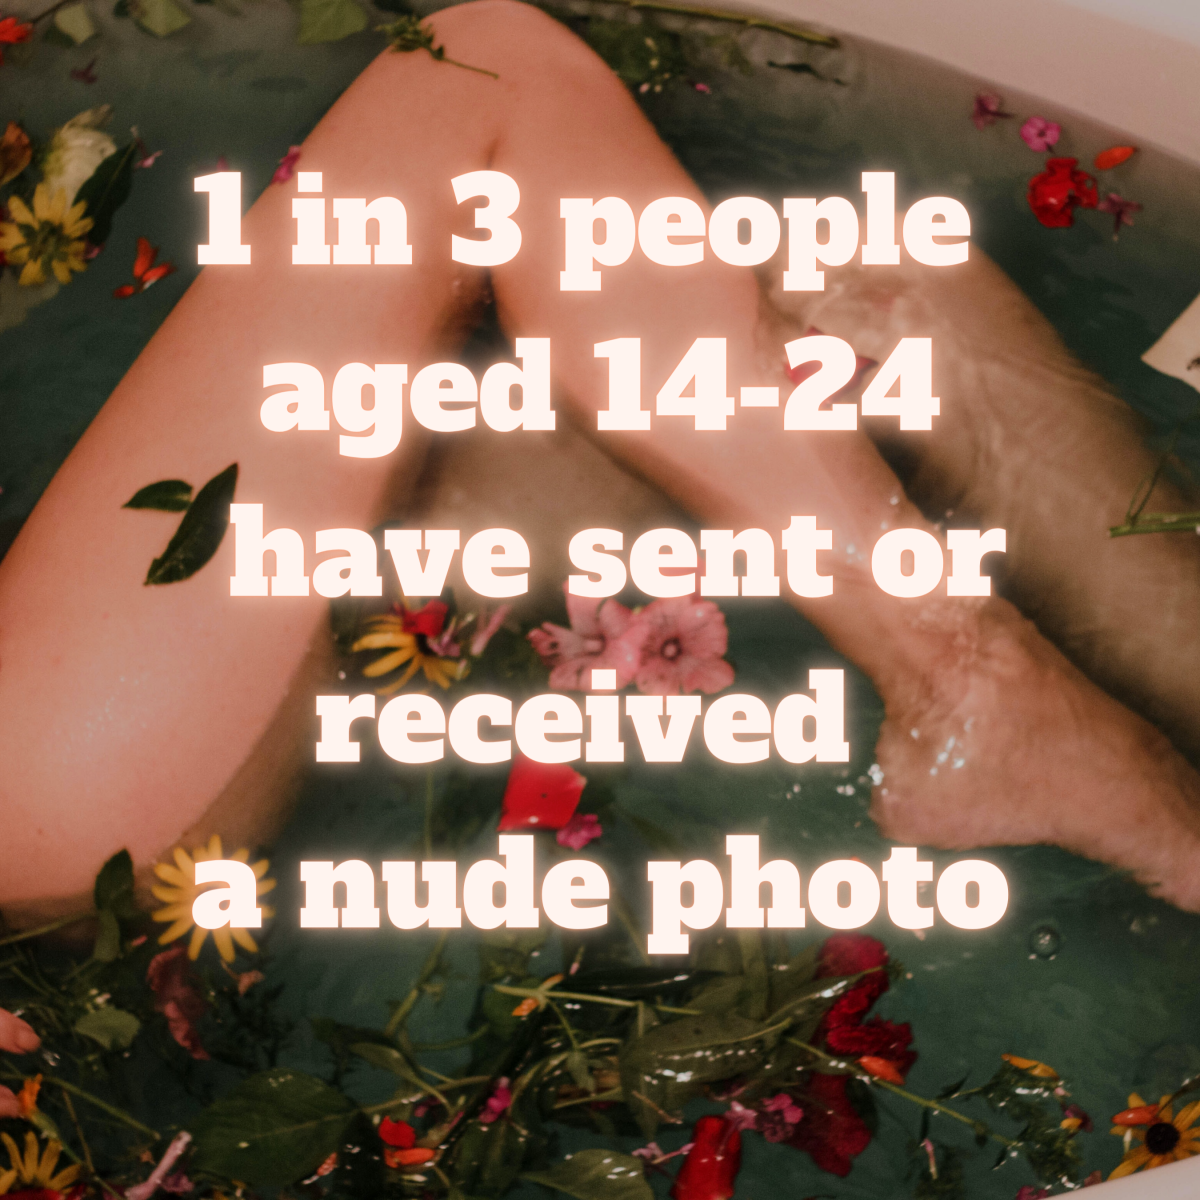 Make sure both sexters consent—and are old enough to legally do so.